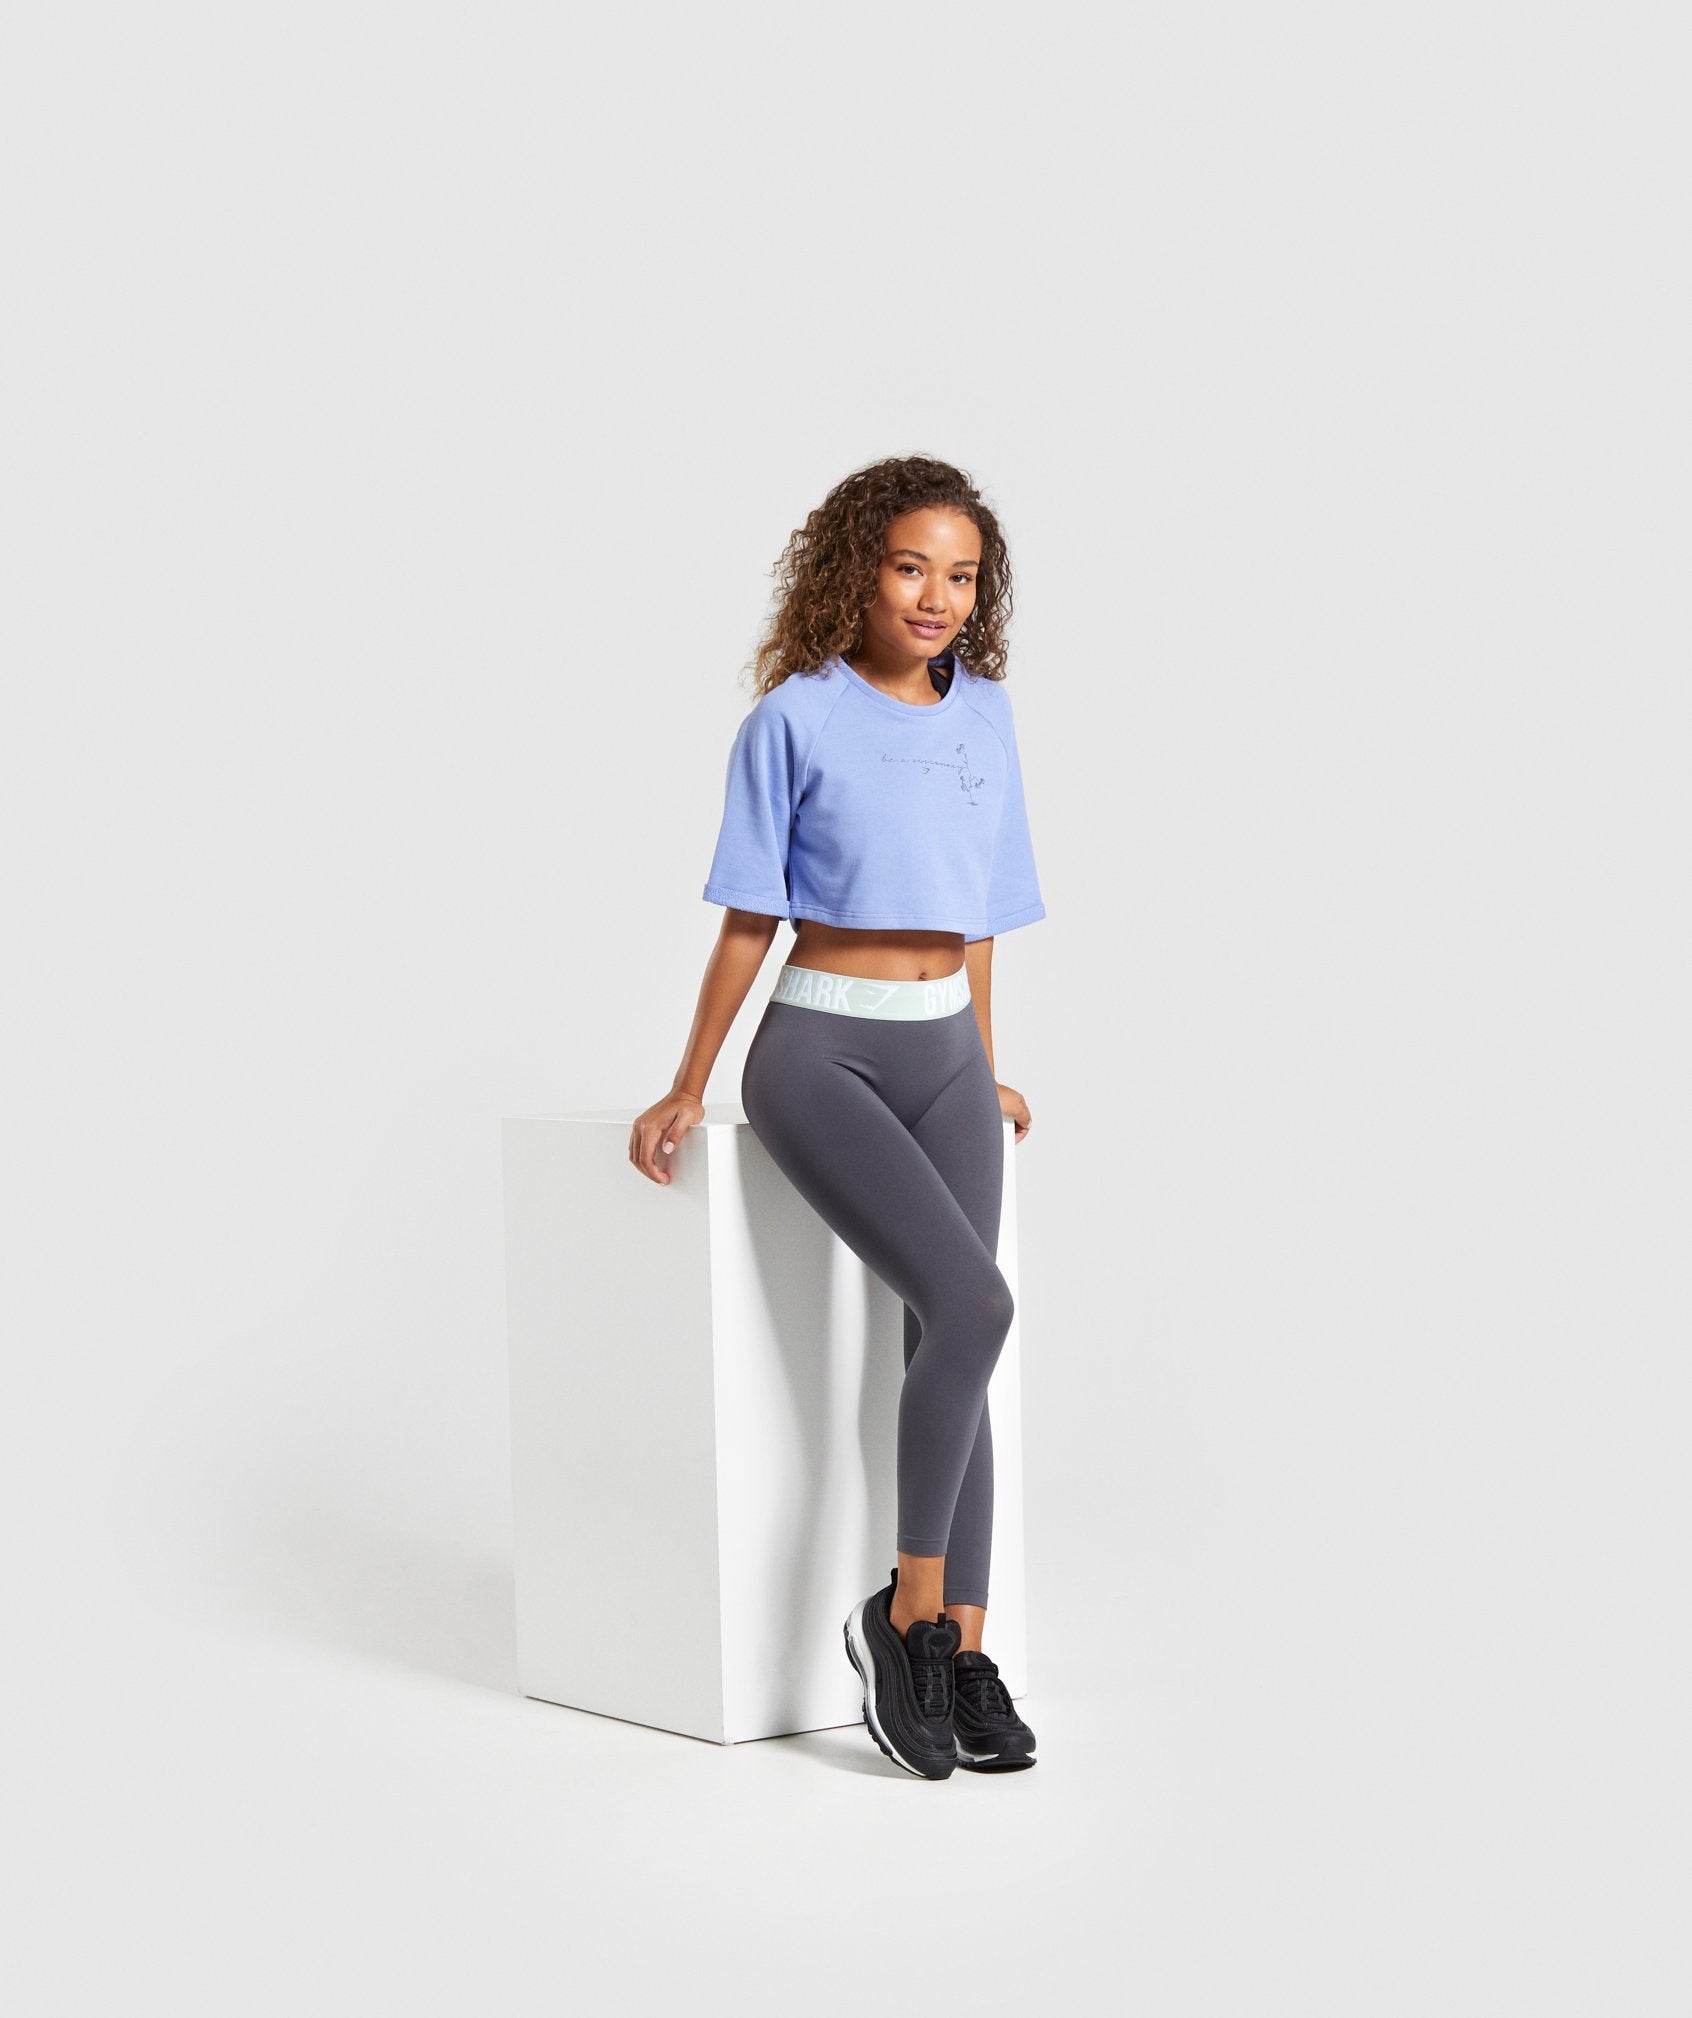 Roots Boxy Cropped Sweater in Light Blue - view 4